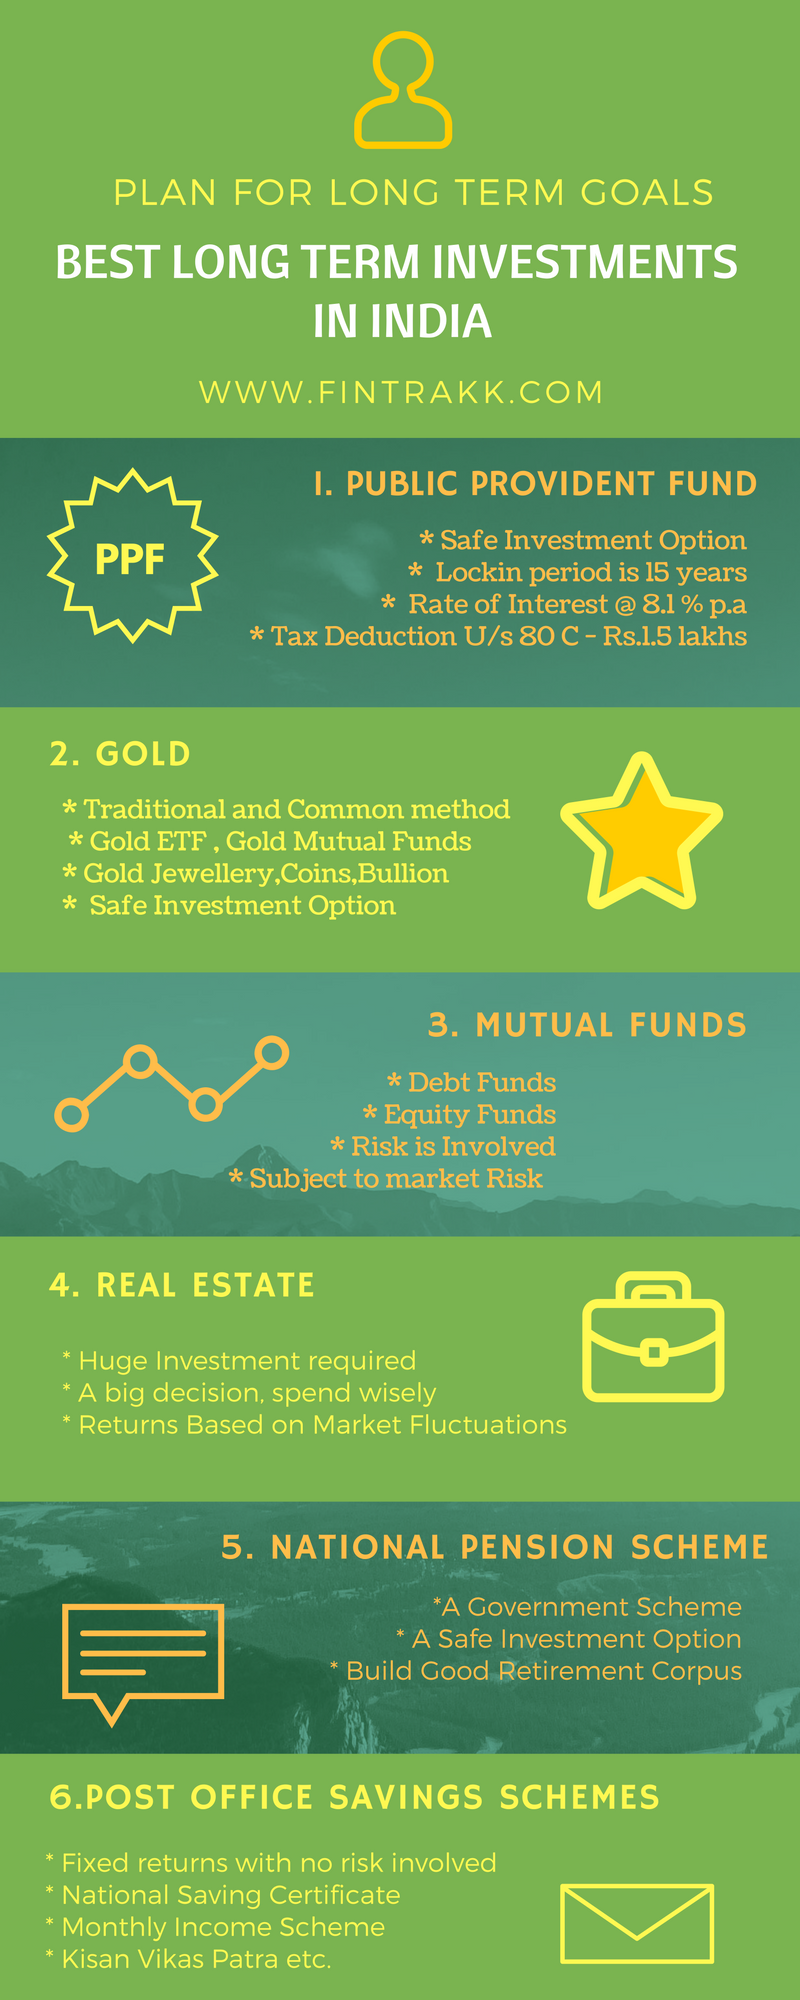 Investment Infographic,Long term Investments Infographic,best long term Investments,PPF,Gold,mutual funds